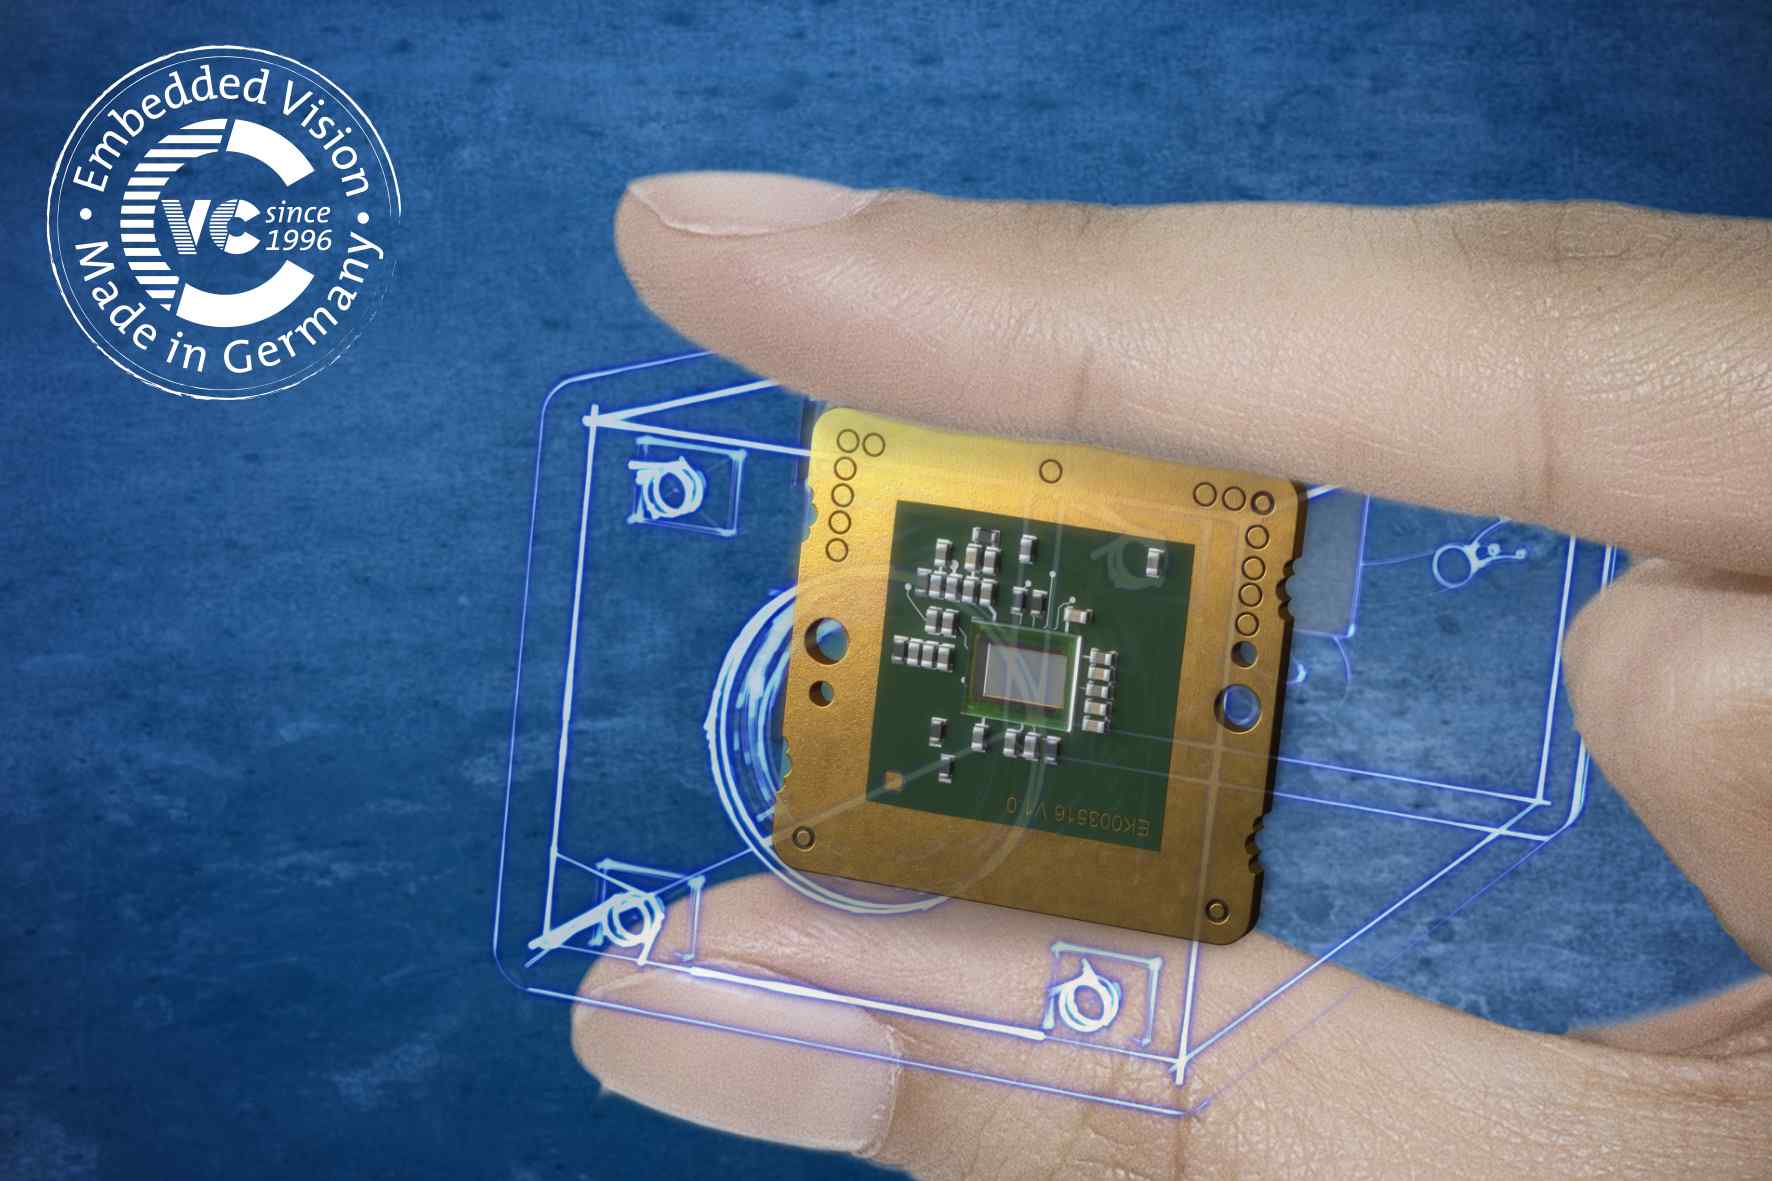 VC picoSmart is probably the smallest embedded vision system in the world